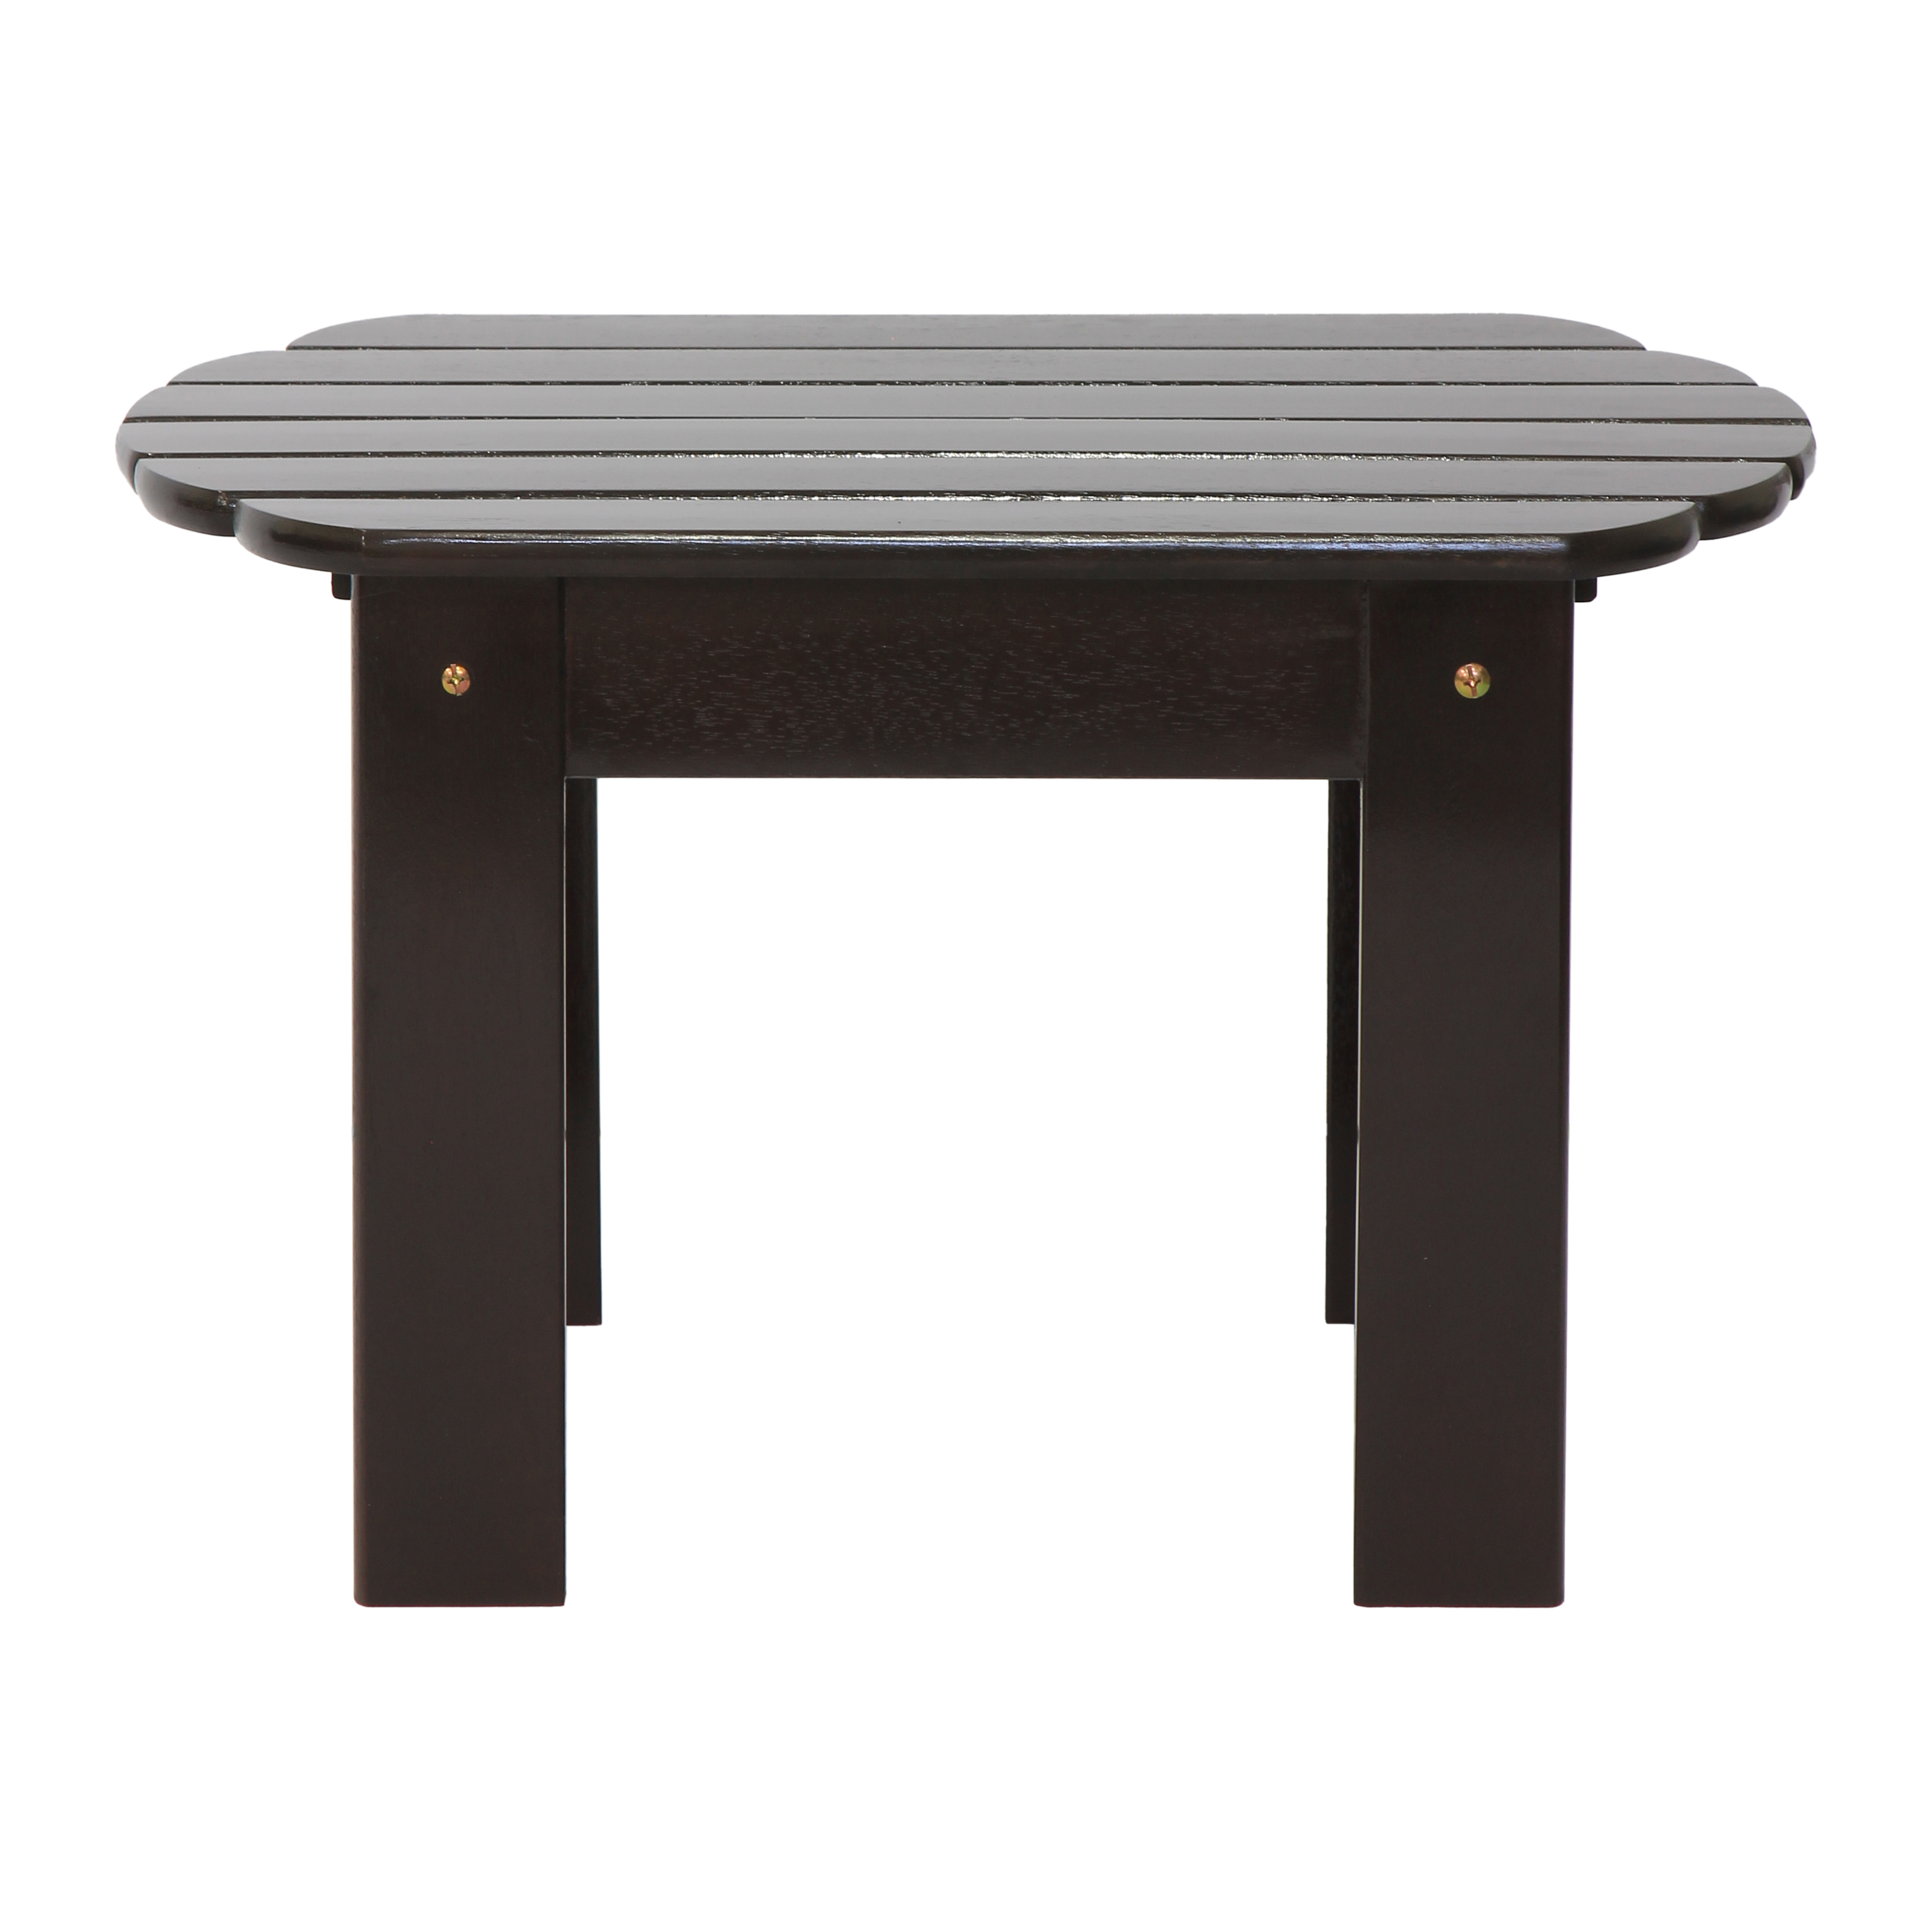 Mainstays Wood Adirondack Outdoor Side Table, Multiple Colors - image 4 of 5